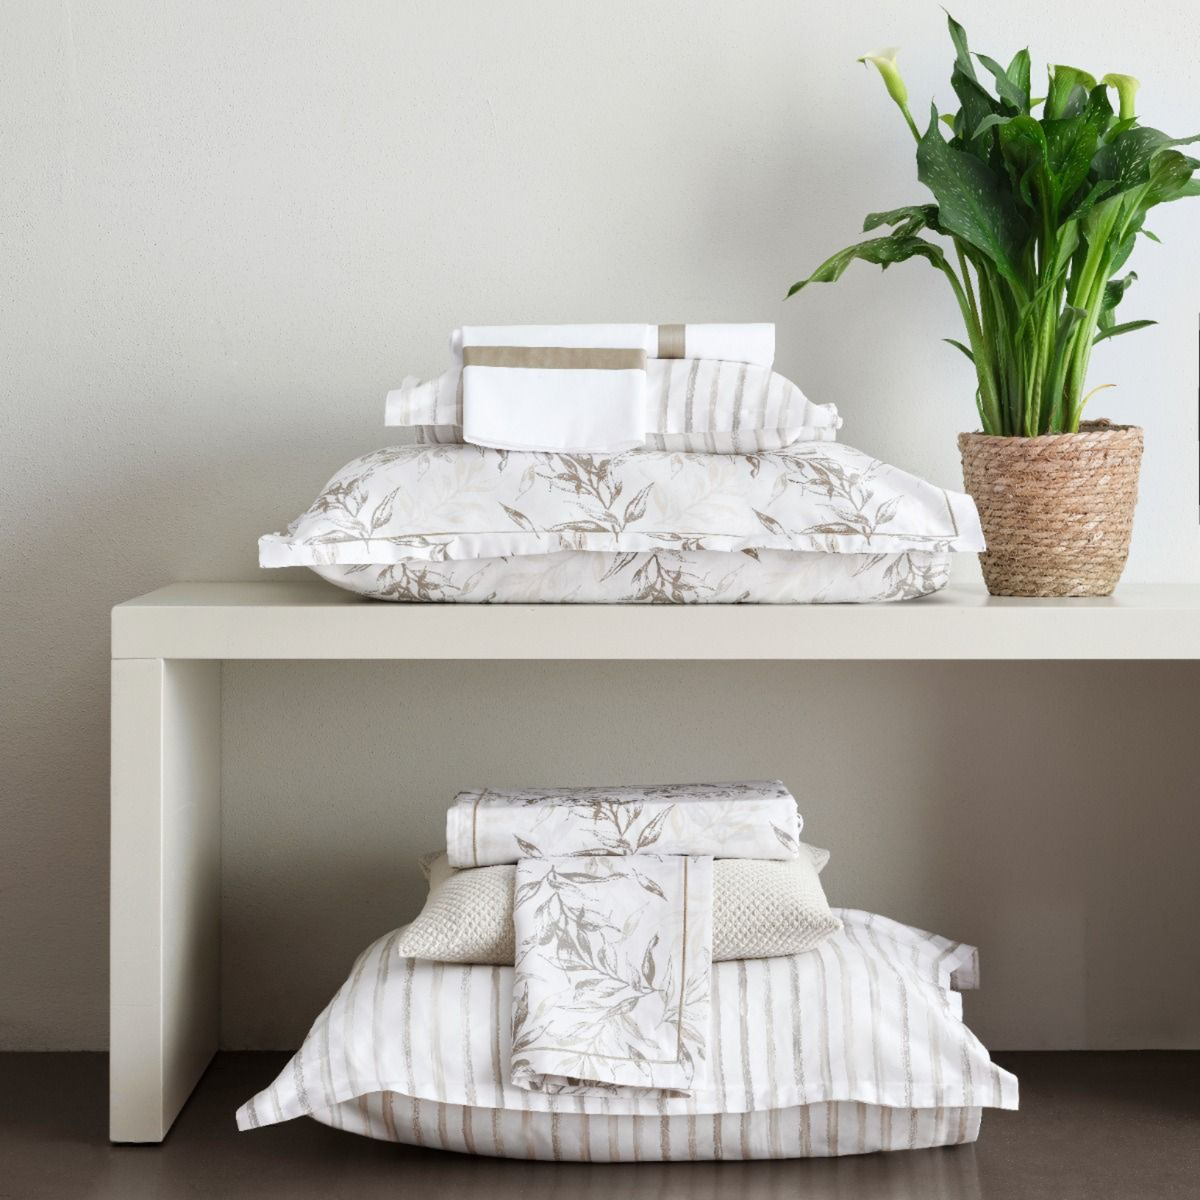 Signoria Natura Bedding in Beige Color with Complimentary Collections